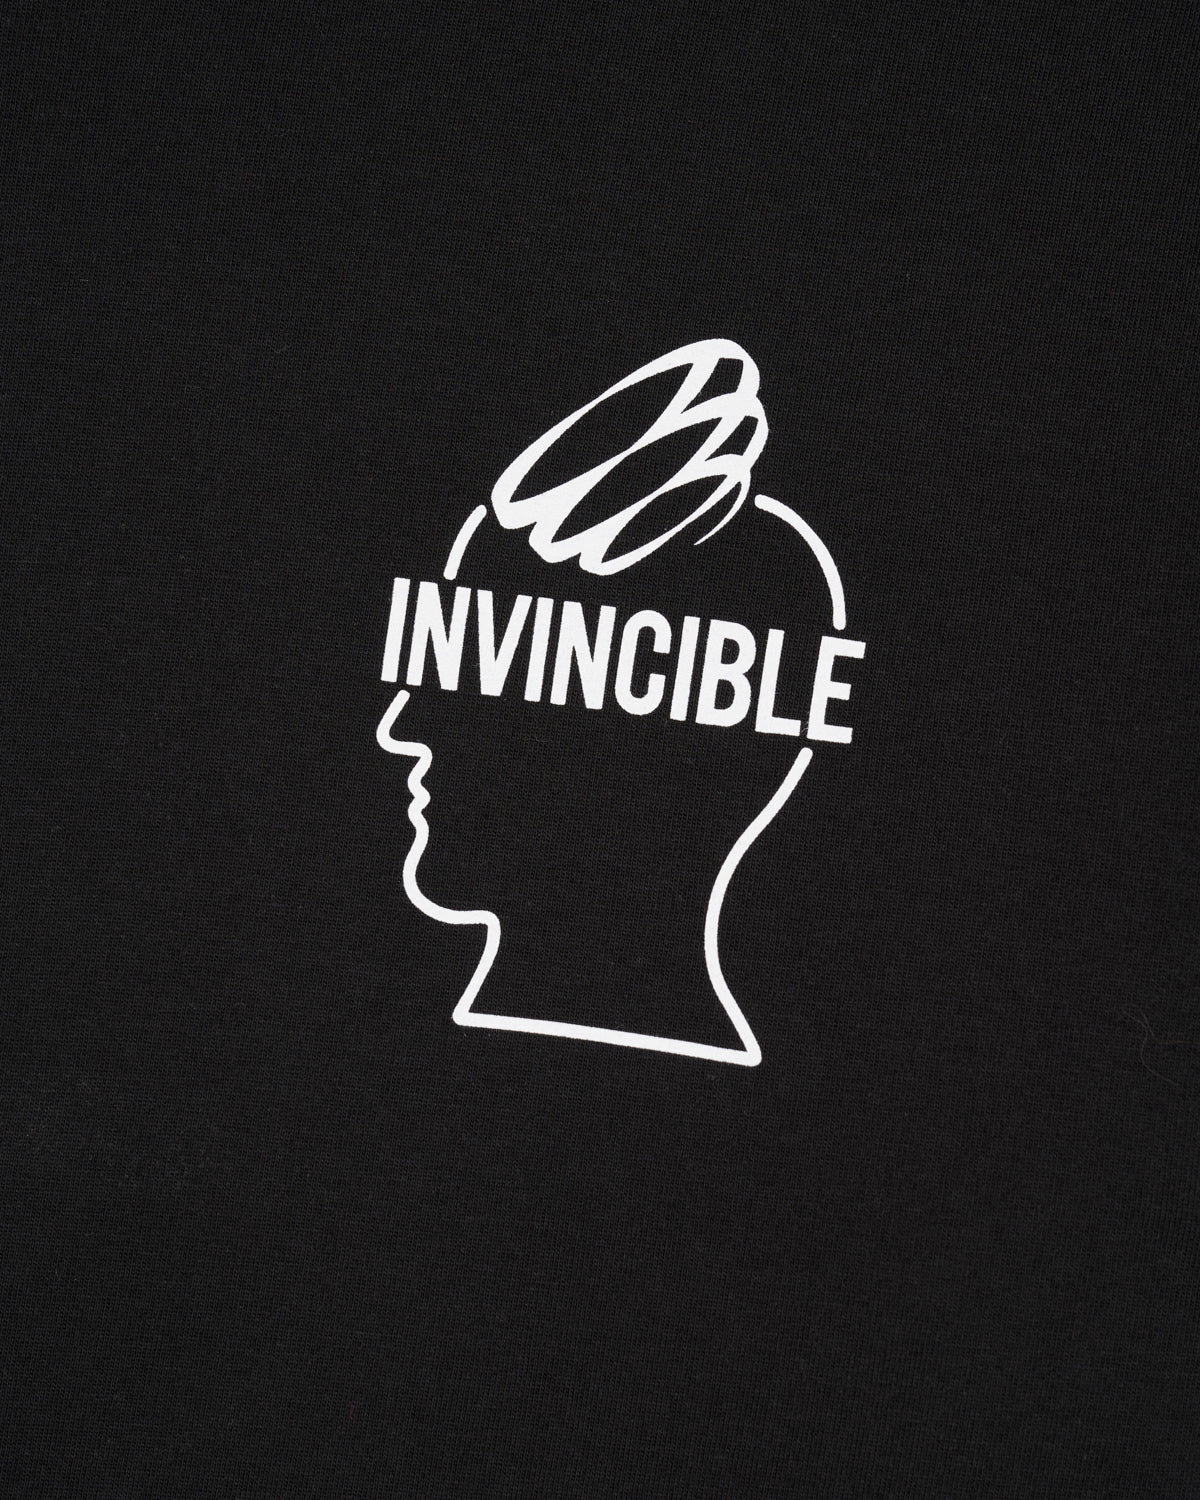 INVINCIBLE GAMING - YouTube